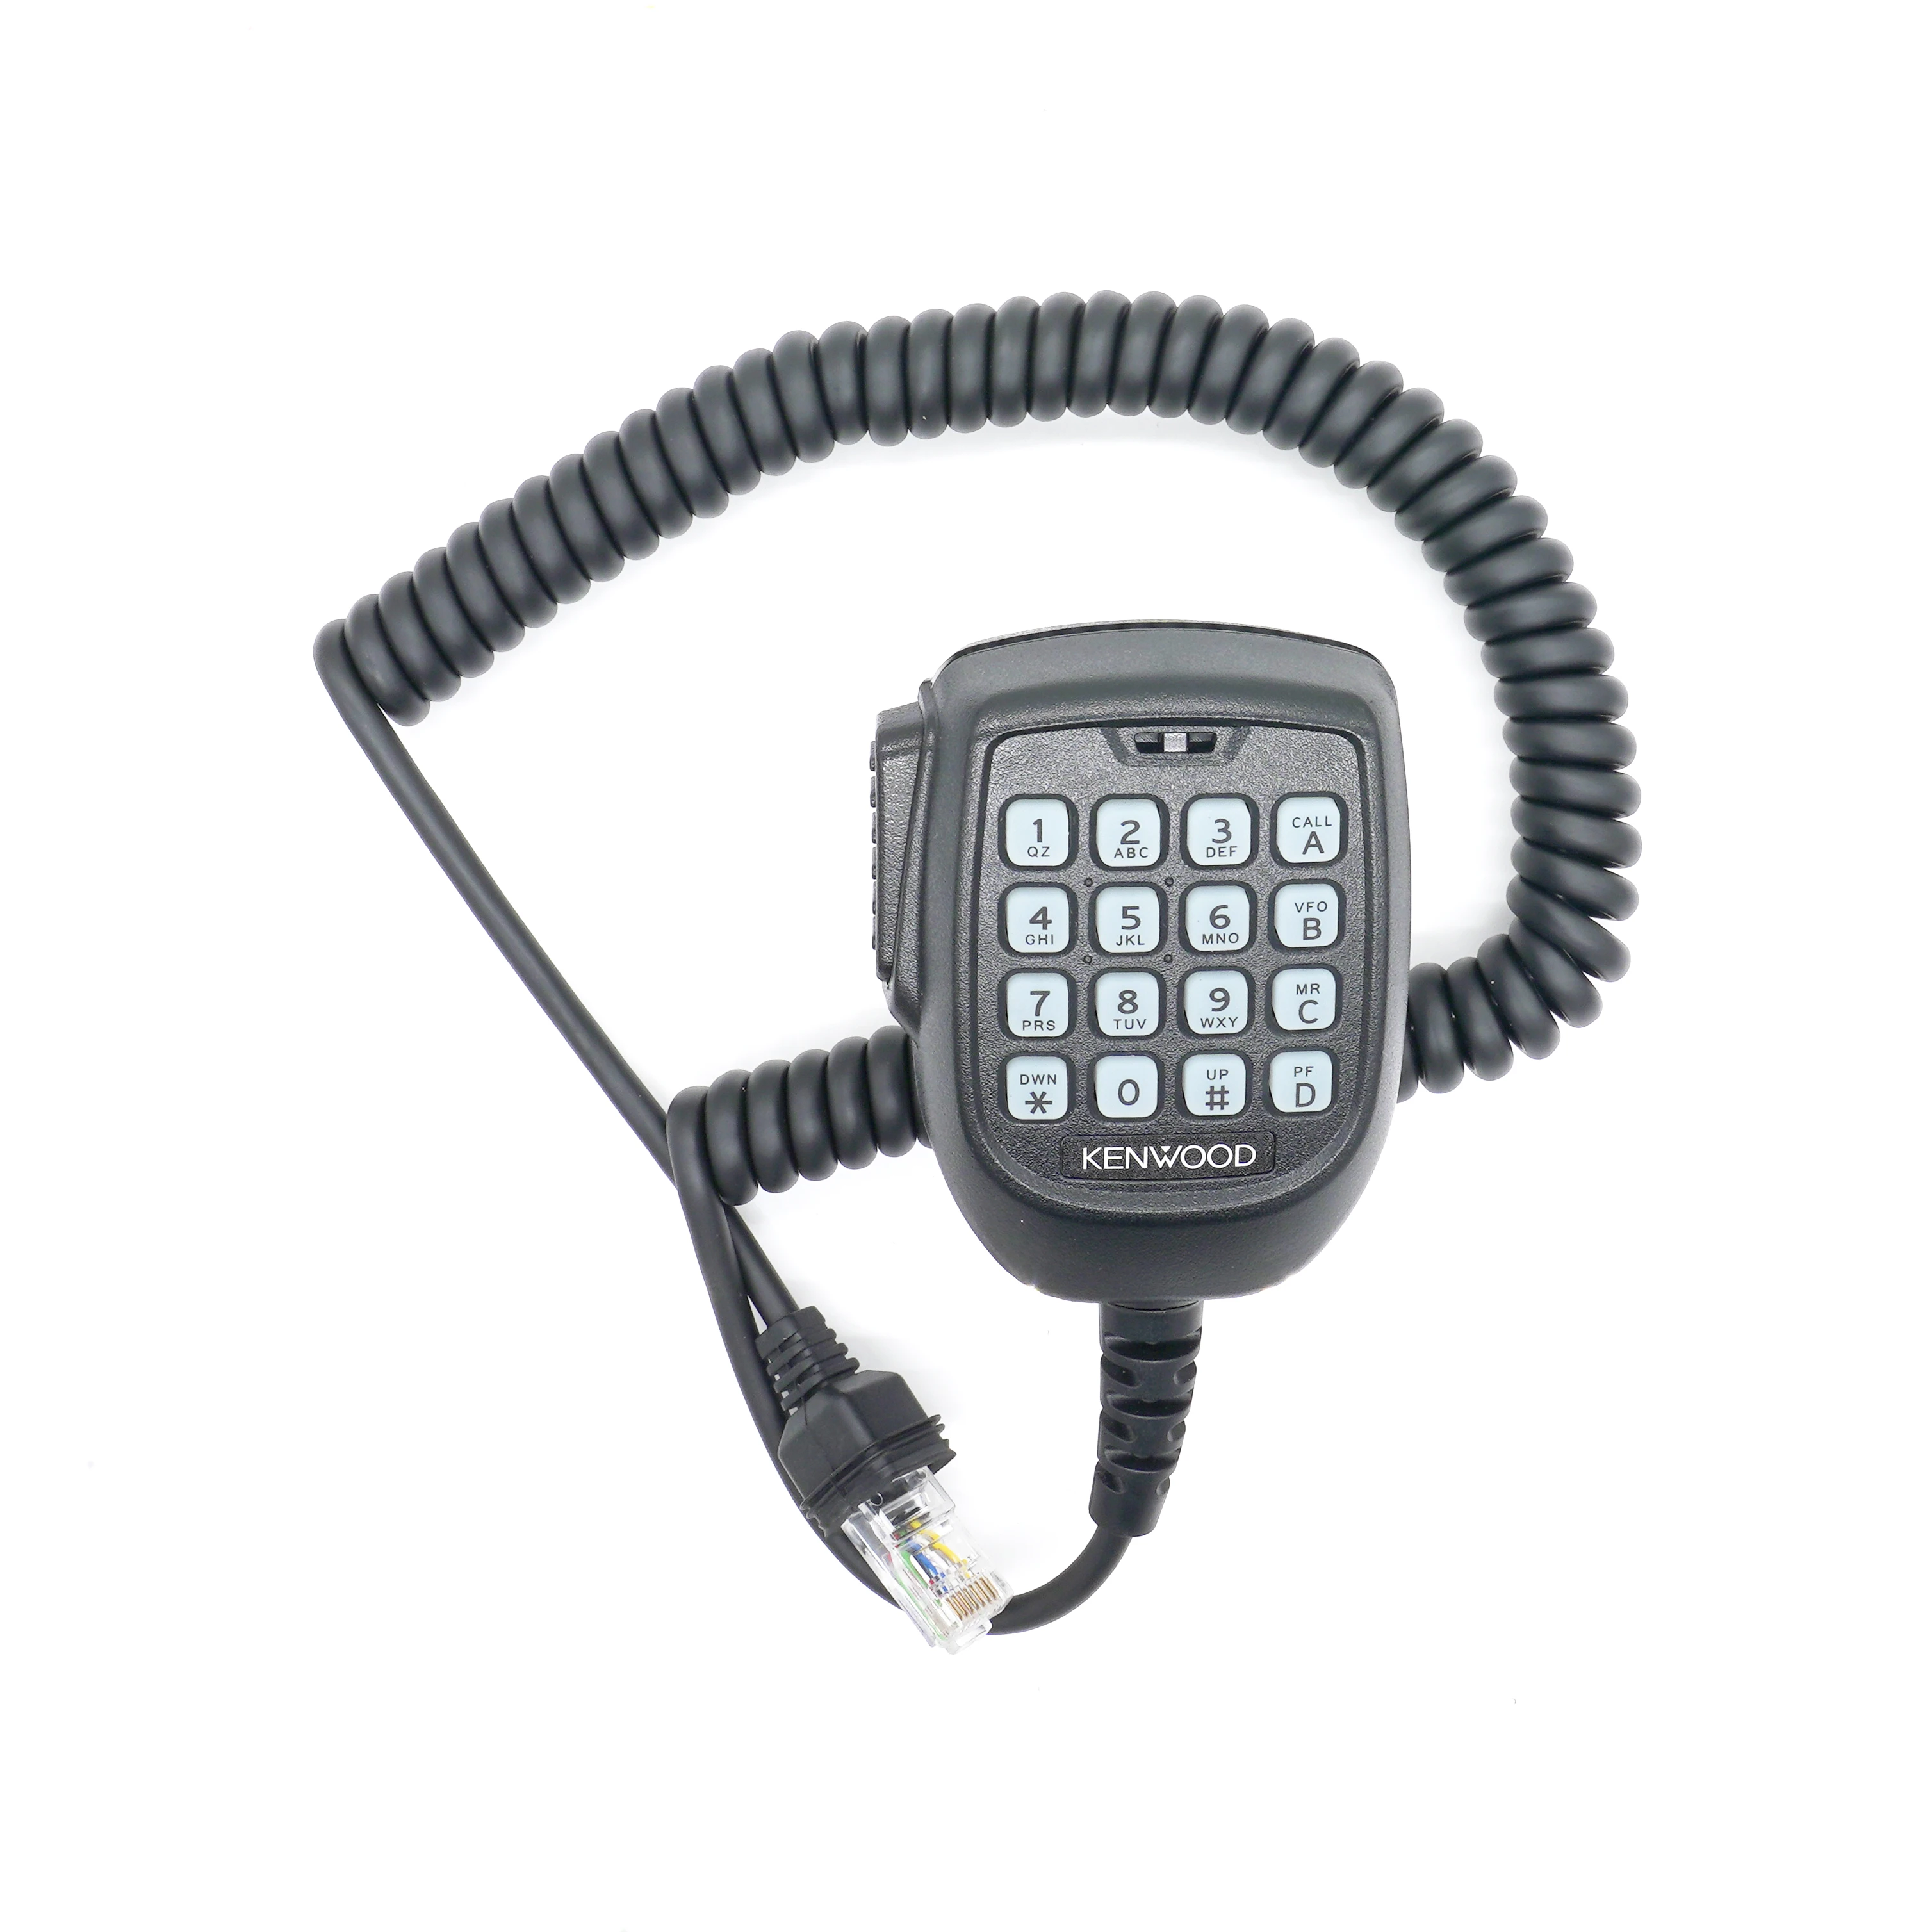 RJ45 8 Pin Suitable for KMC-62 Walkie-talkie Two-way Radio Hand Microphone with Keyboards for Kenwood Car Radio